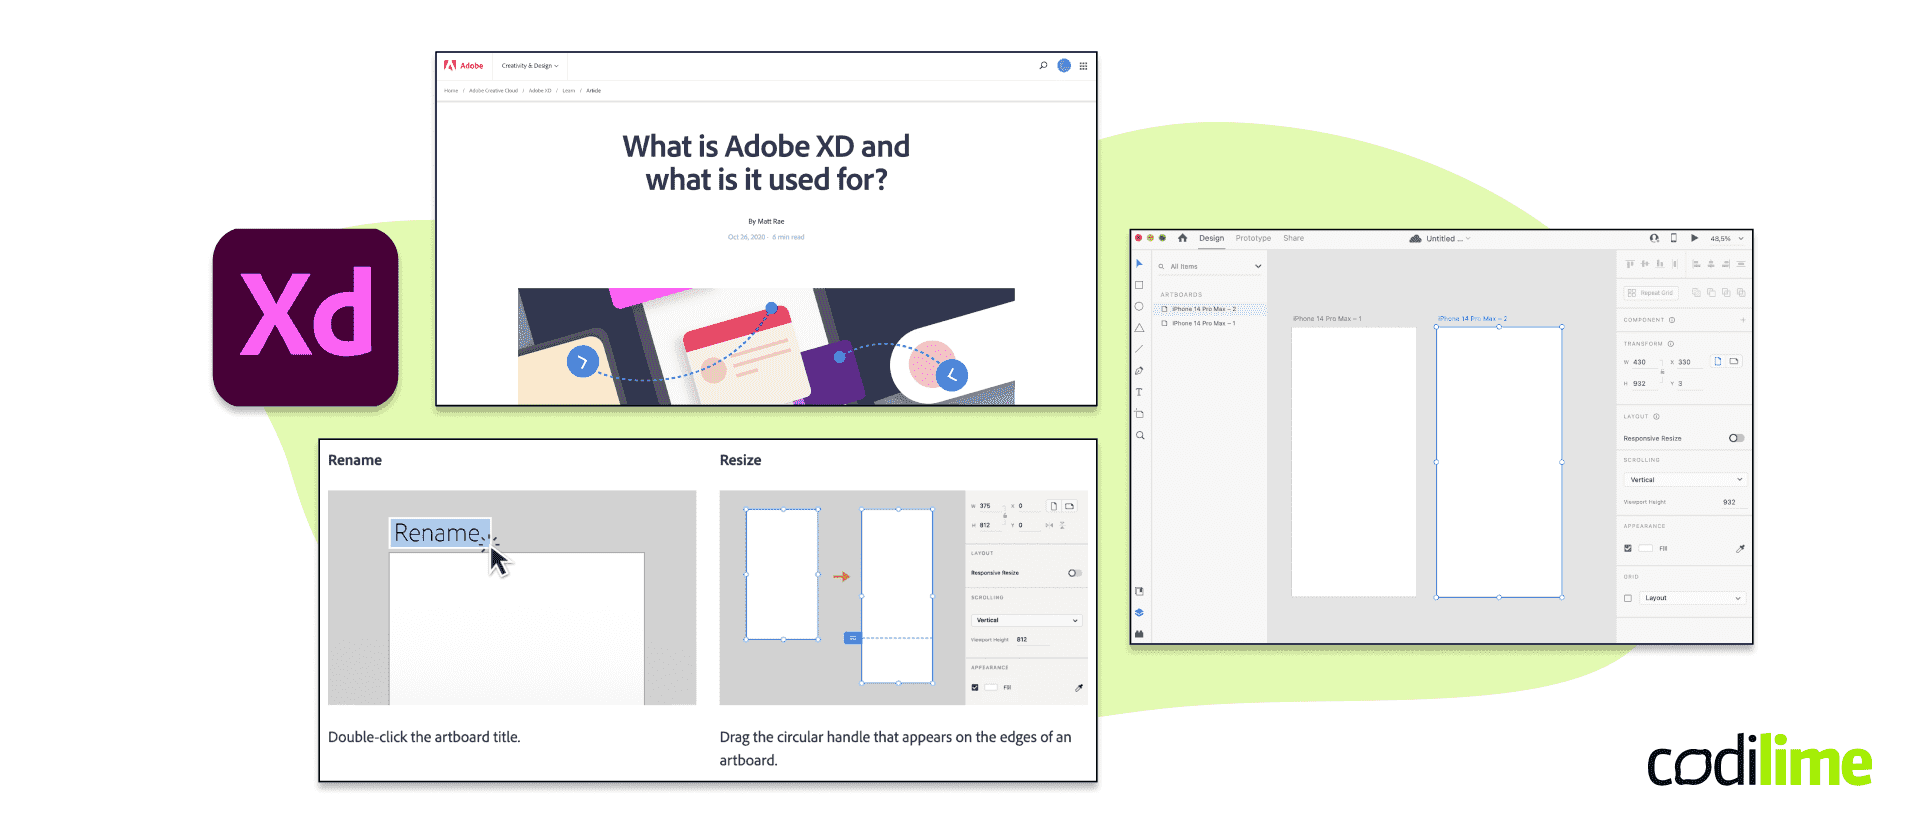  Tools for prototyping - Adobe XD